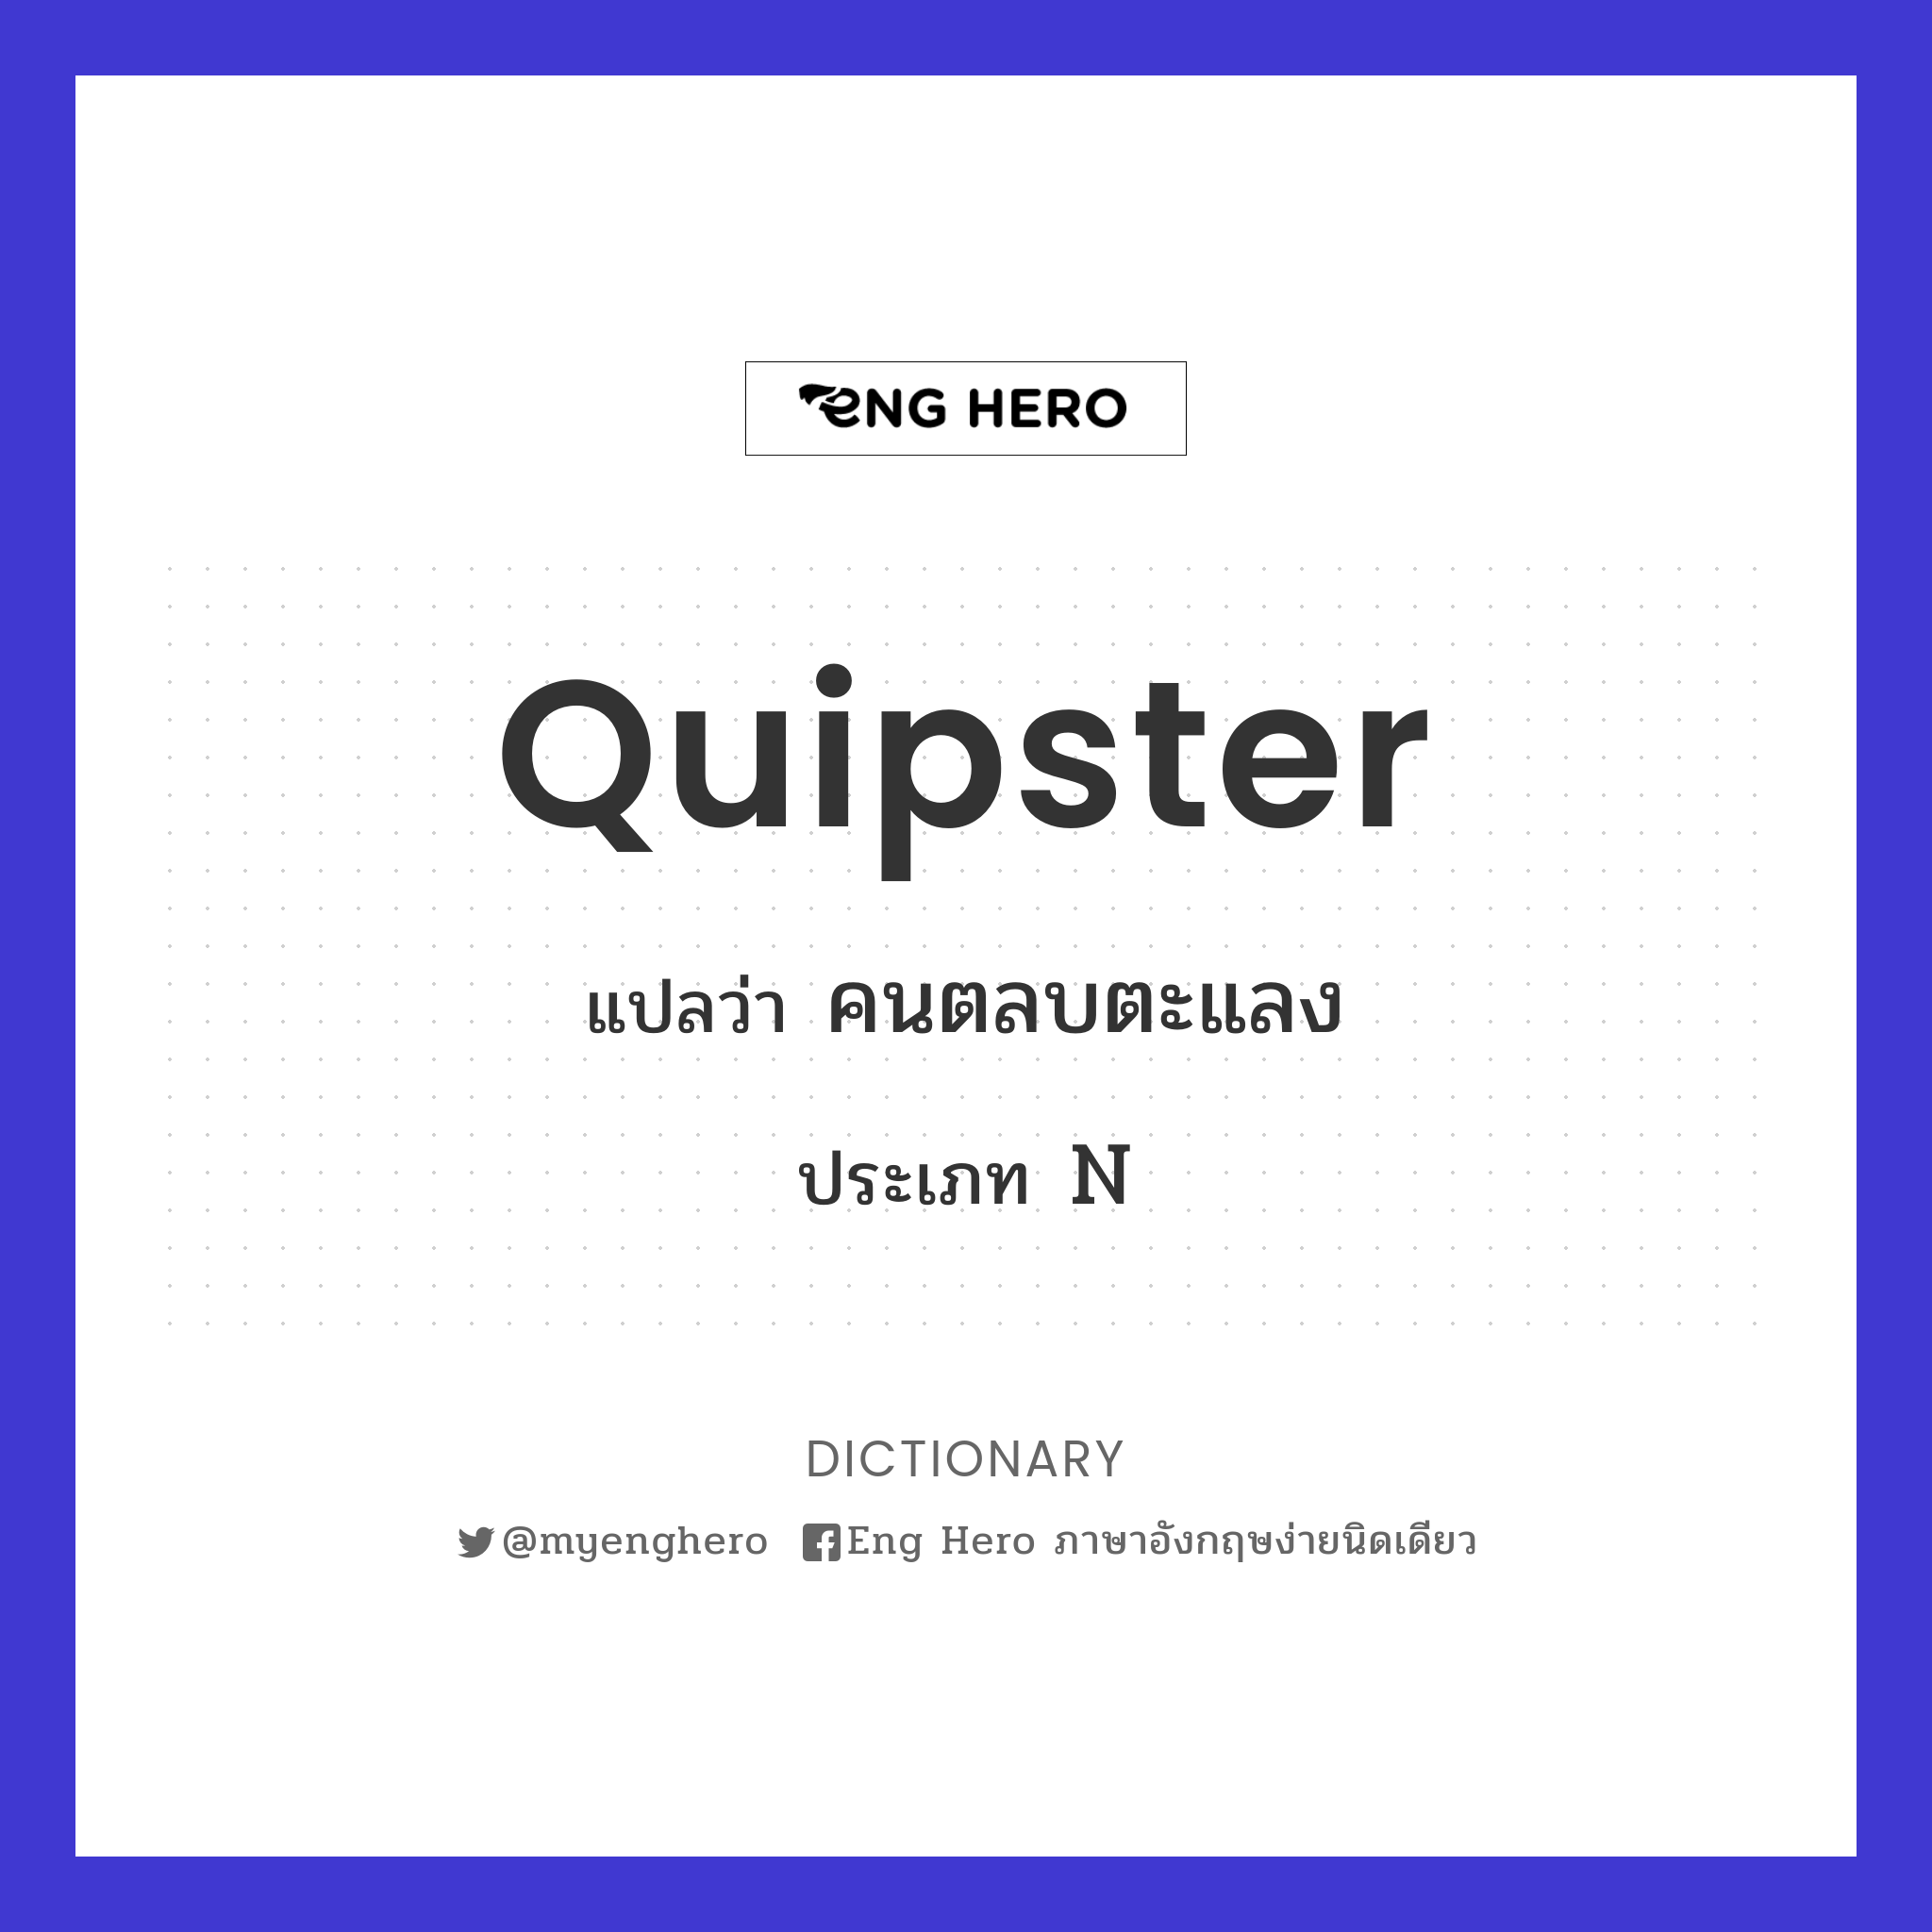 quipster